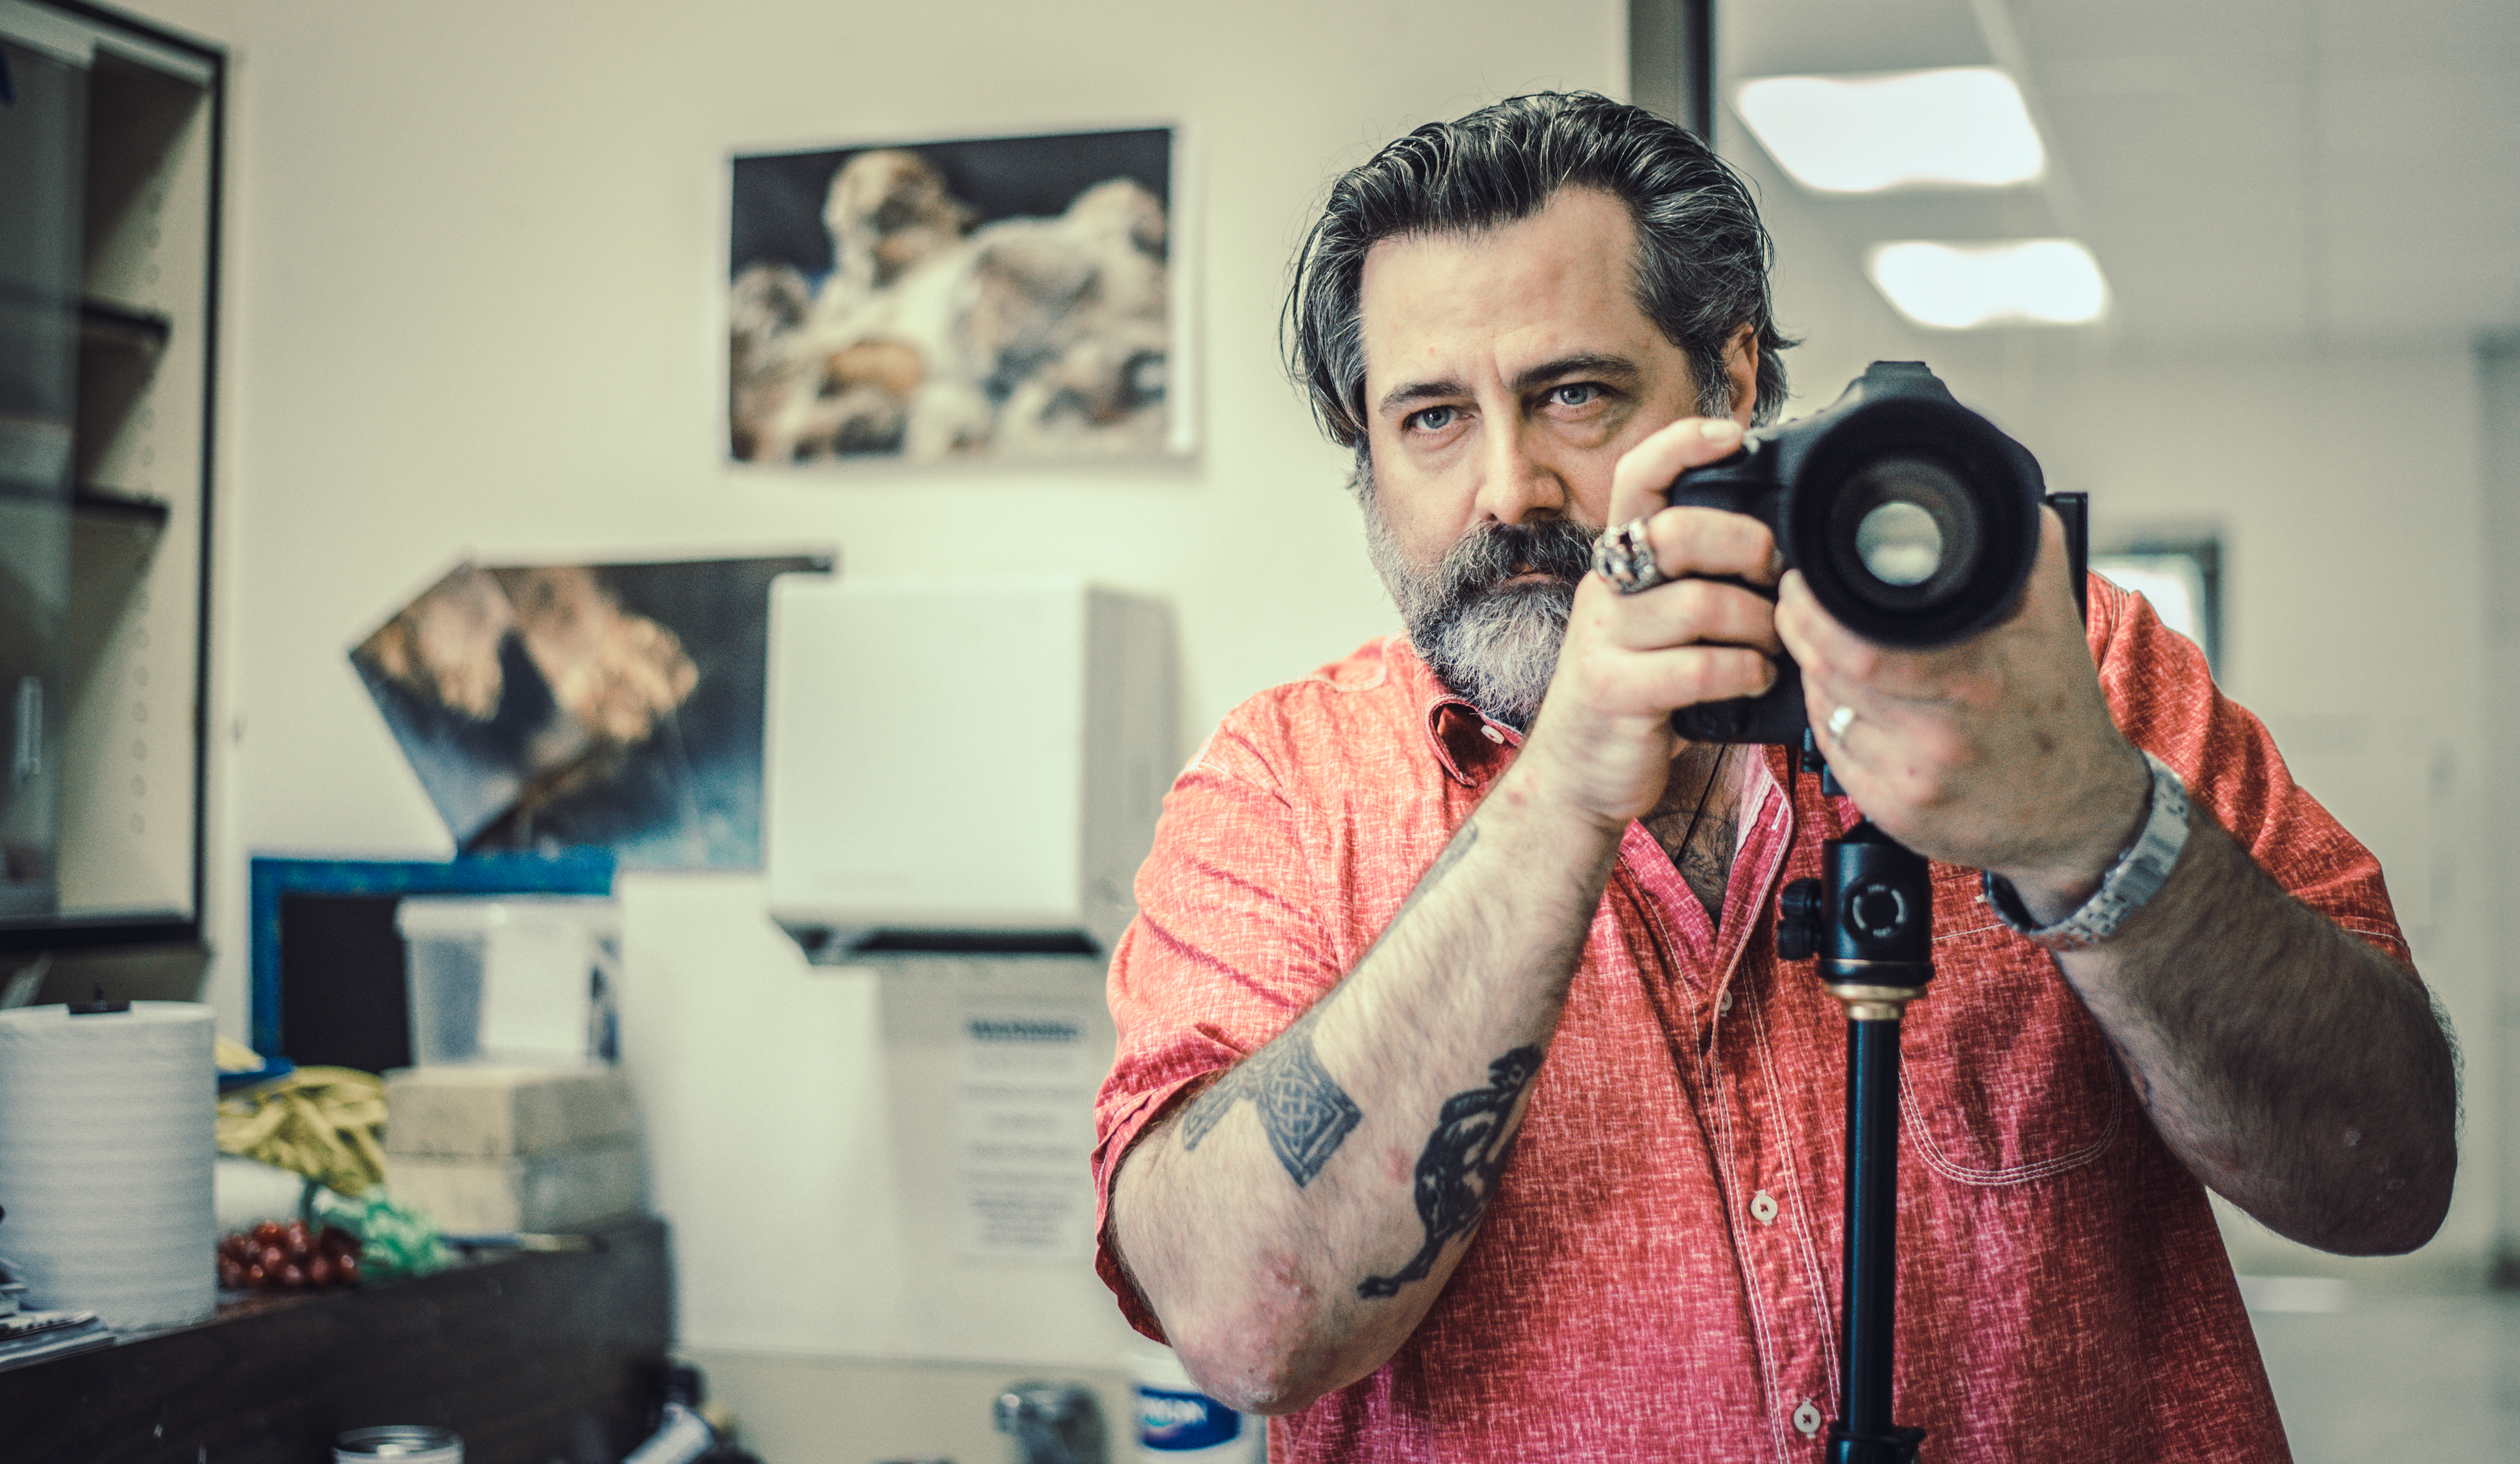 A photography student holds his camera in an art studio